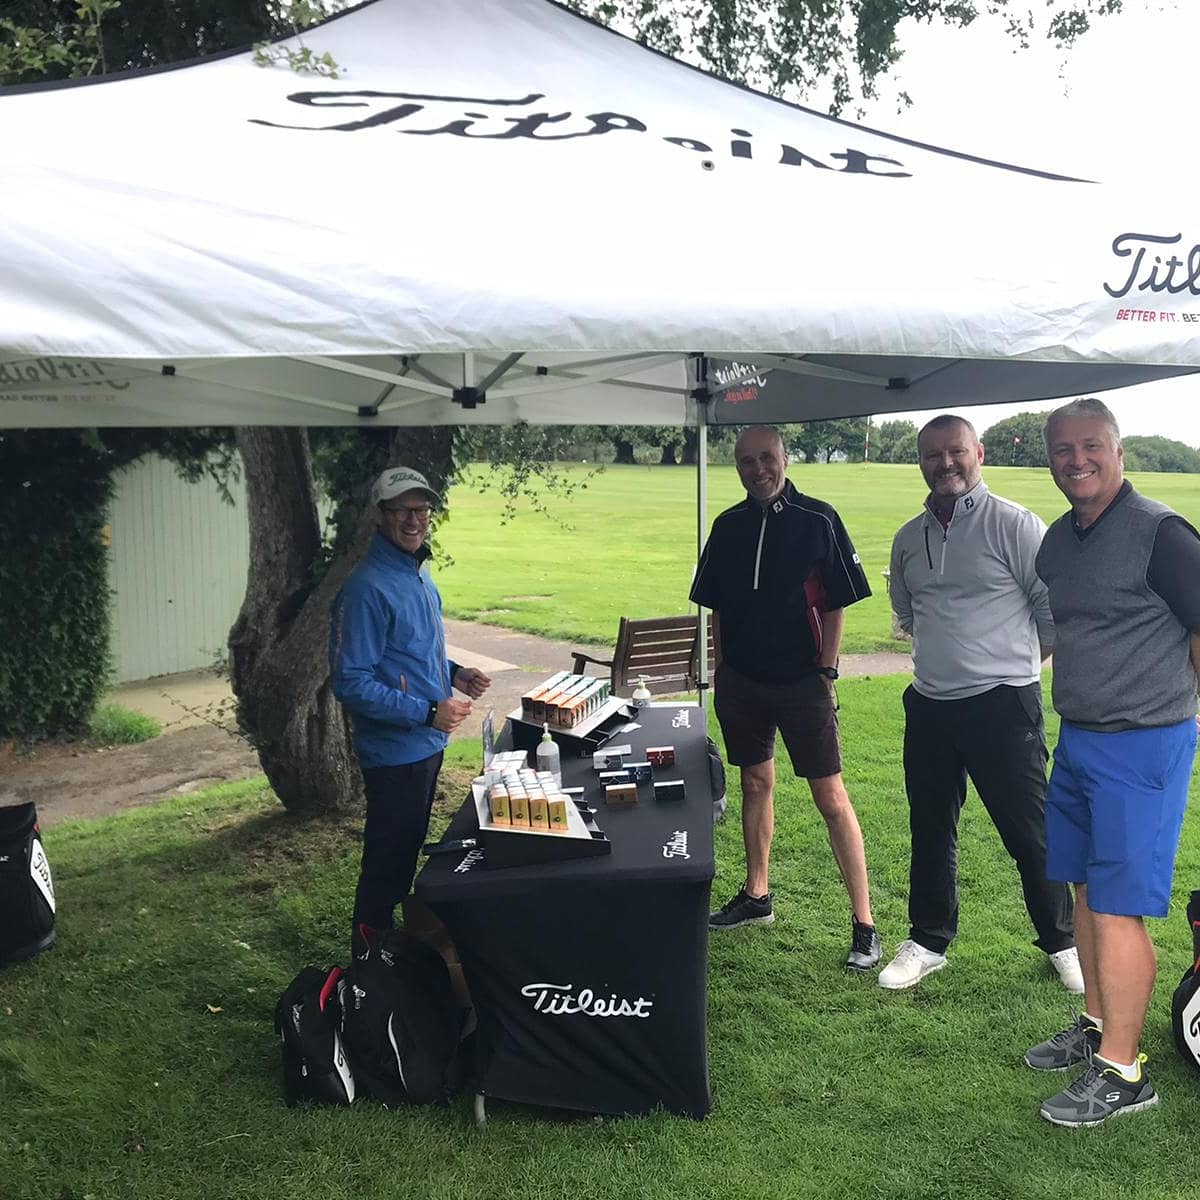 Sherborne Golf Club members enjoying the Titliest Golf Ball Eduction Day delivered by Golf Ball Product Specialist, Tom Hiscock @tommy_titleist @titleistukireland